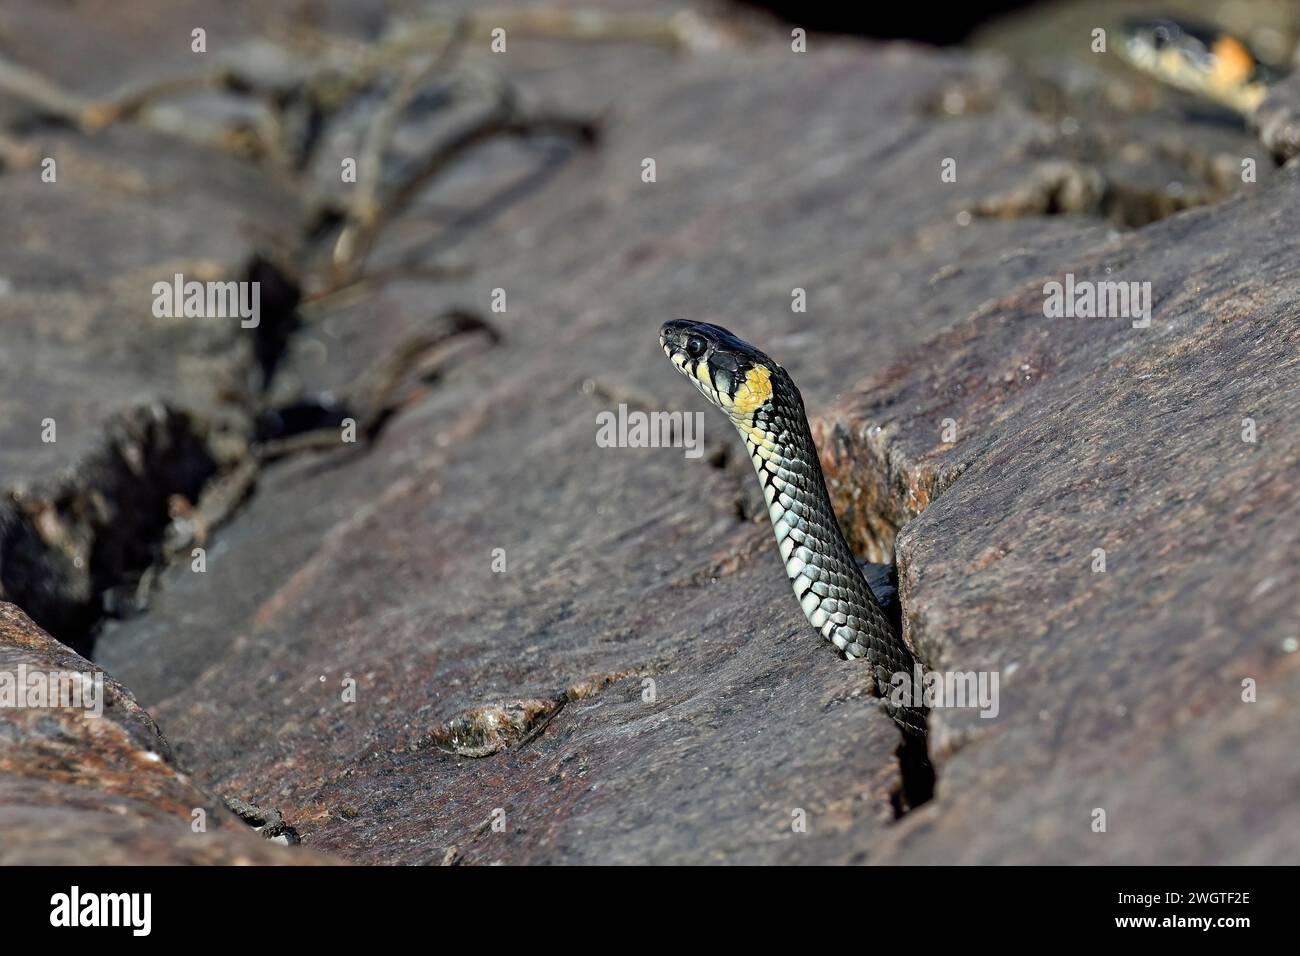 Grass snake peeking from the rock crevise Stock Photo